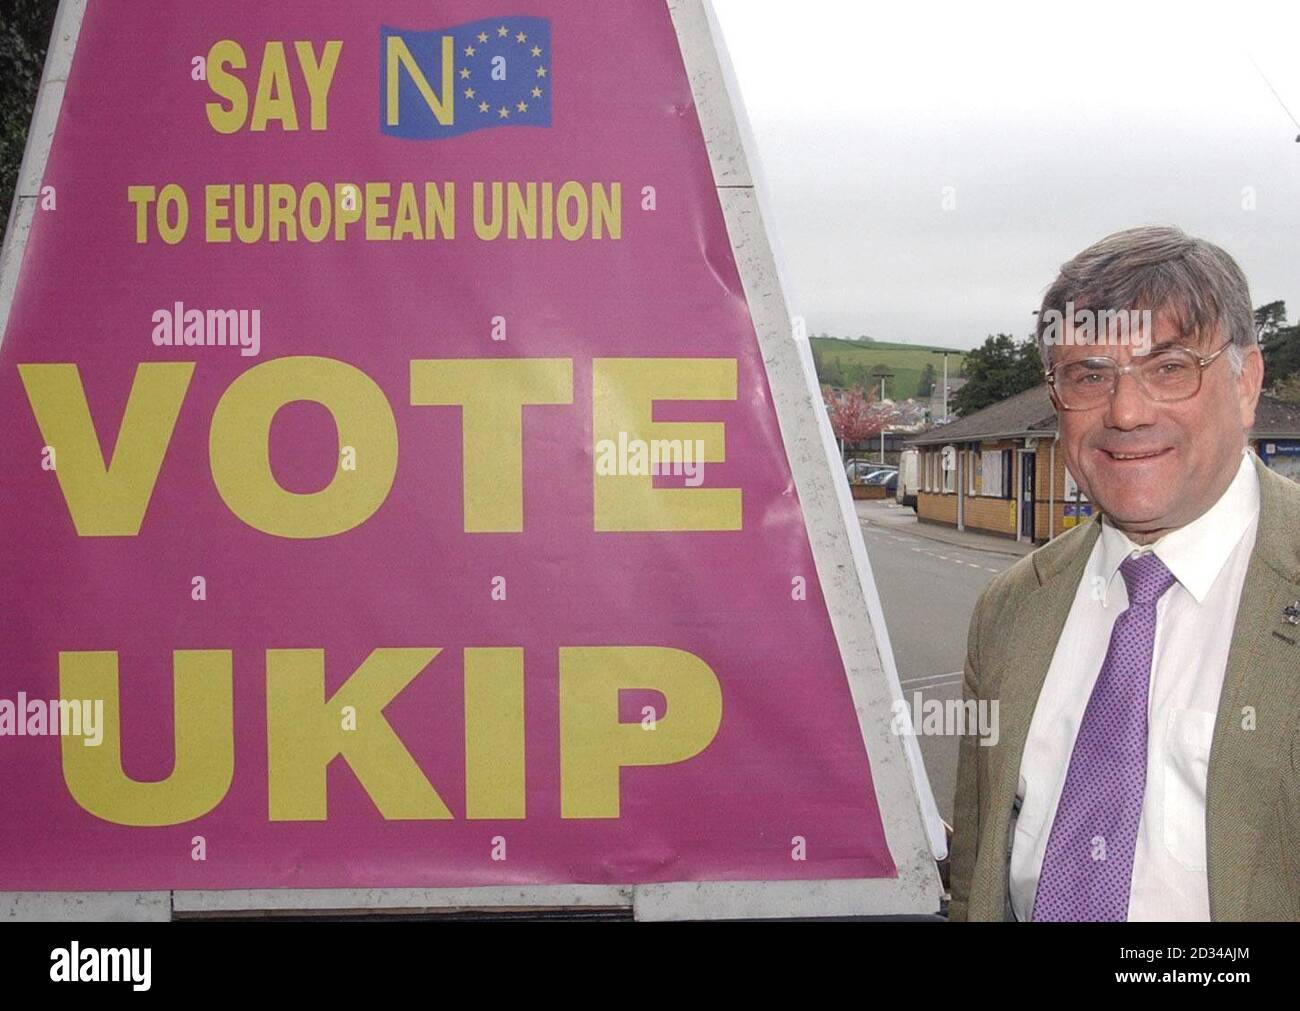 UK Independence Party leader Roger Knapman in Totnes, Devon. After criss-crossing the country in recent weeks, Mr Knapman returned to campaign in his own constituency this weekend. Stock Photo